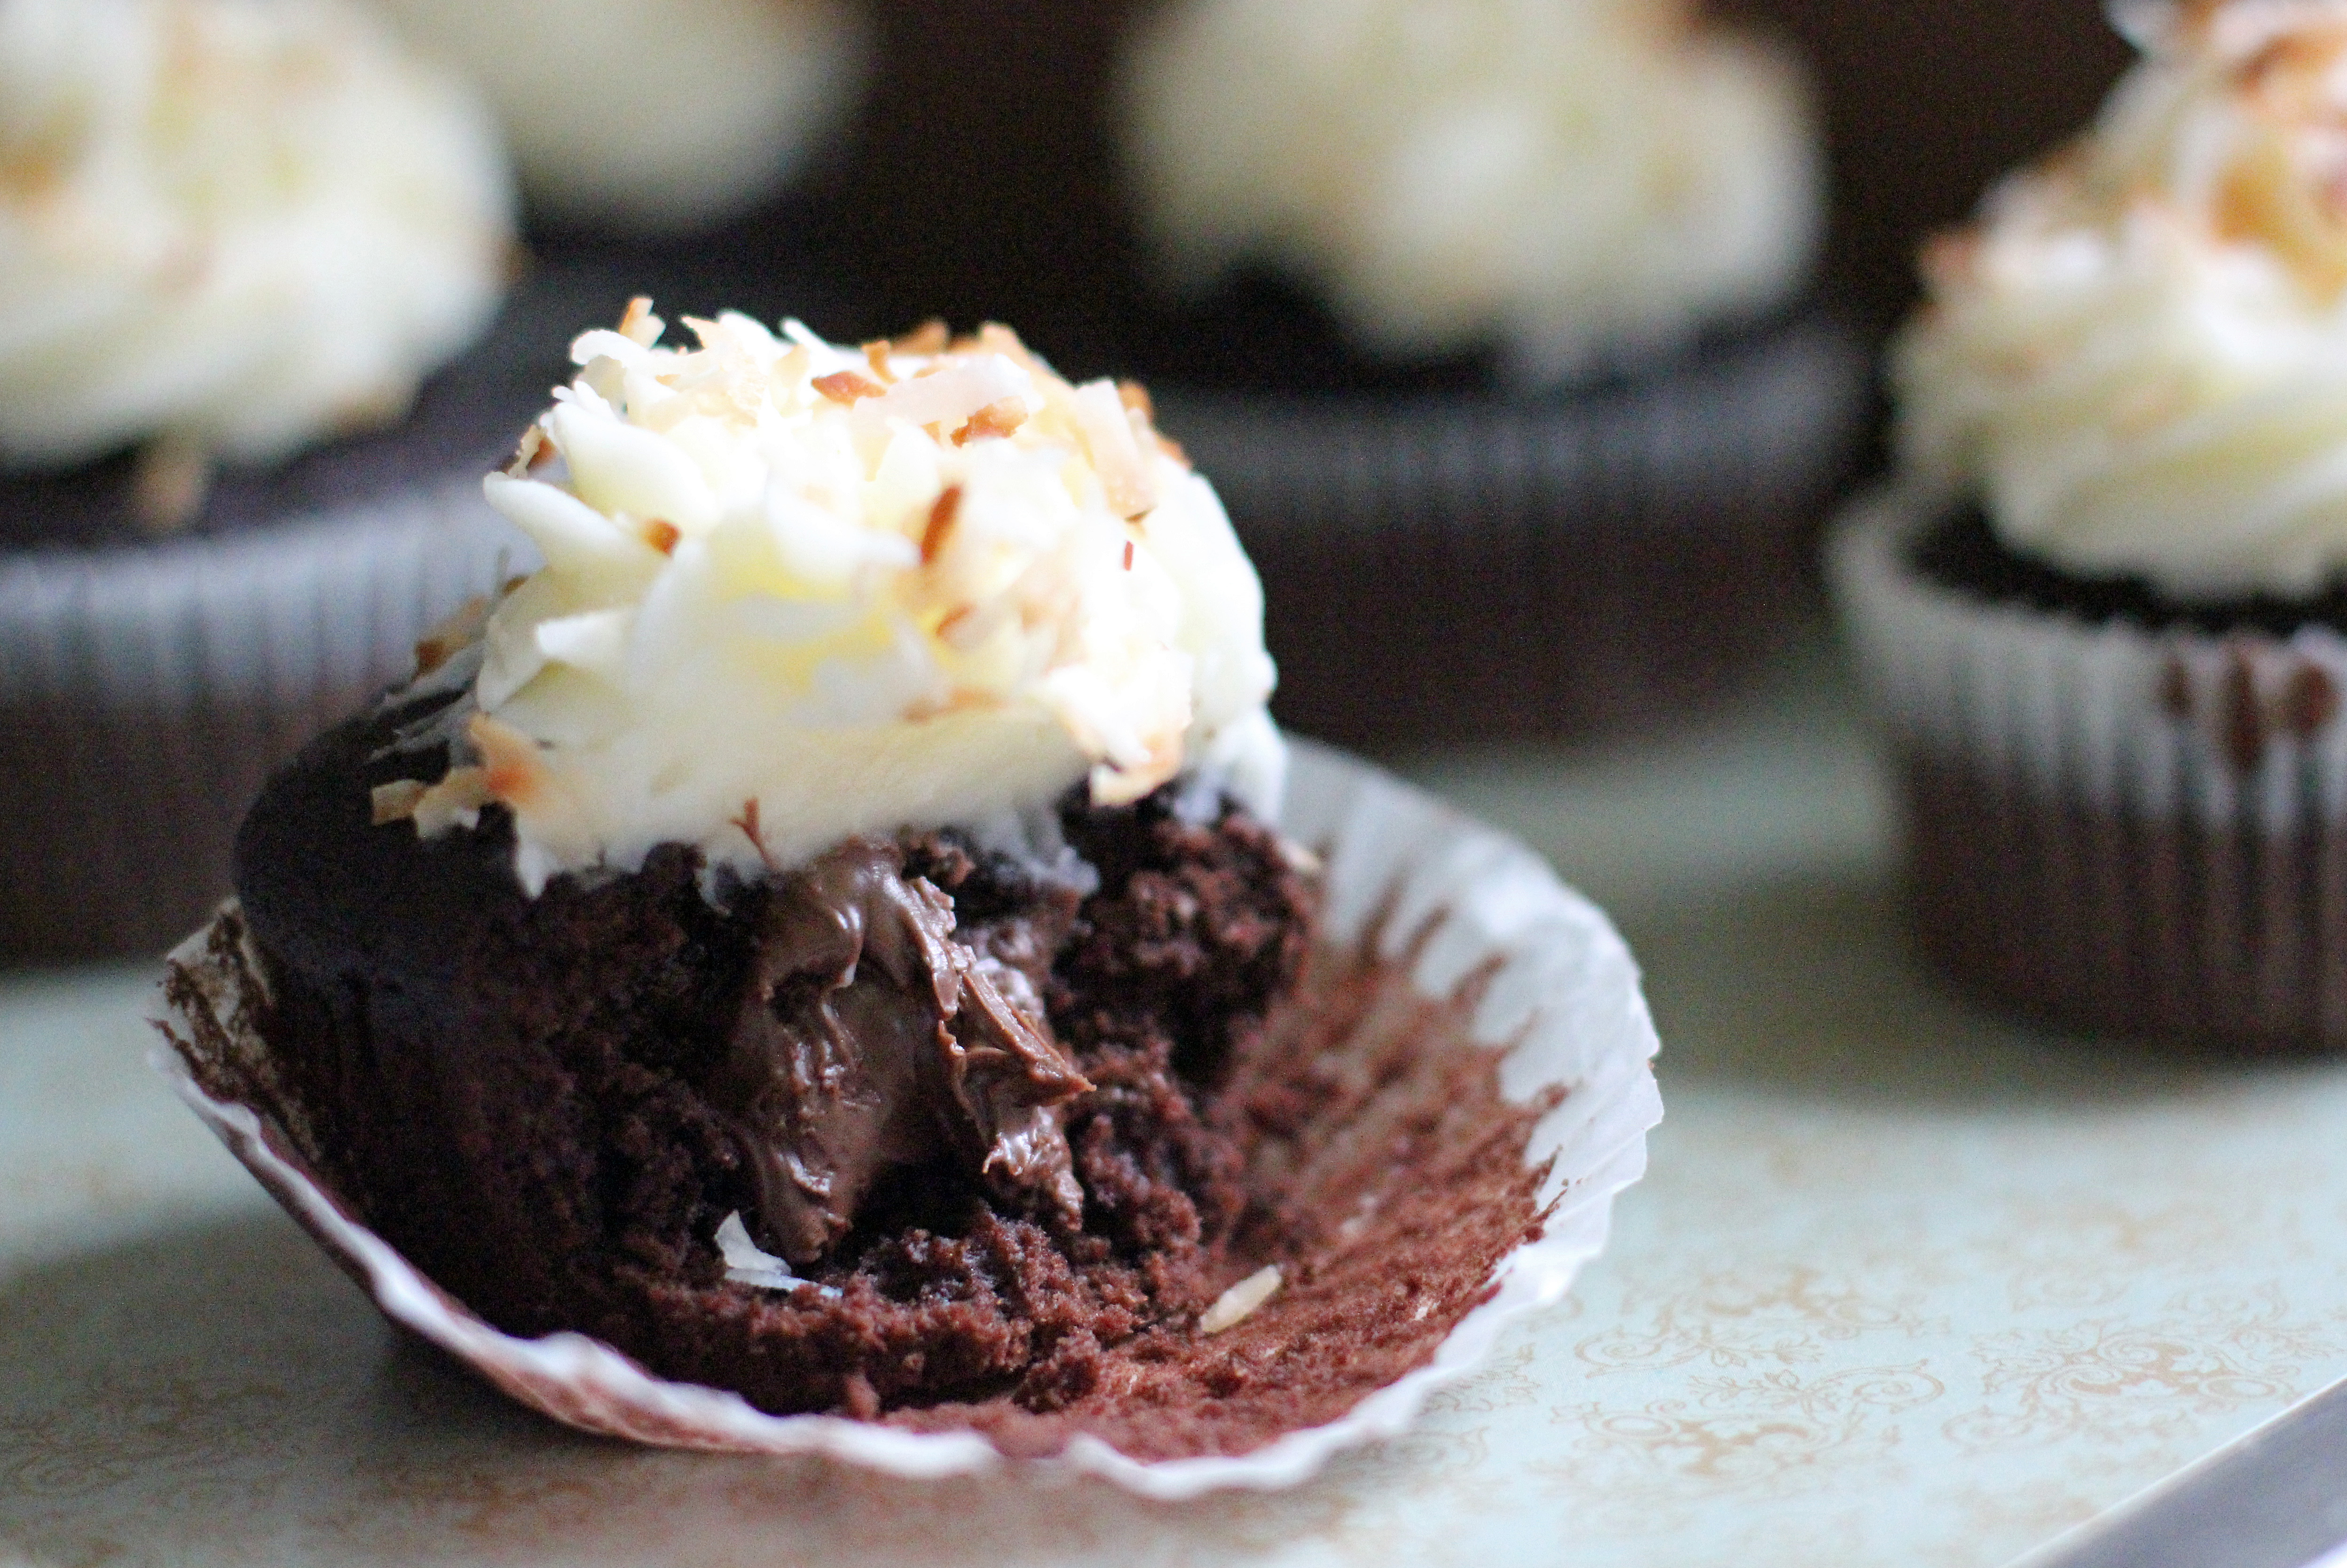 Chocolate Cupcakes with Cream Cheese Filling